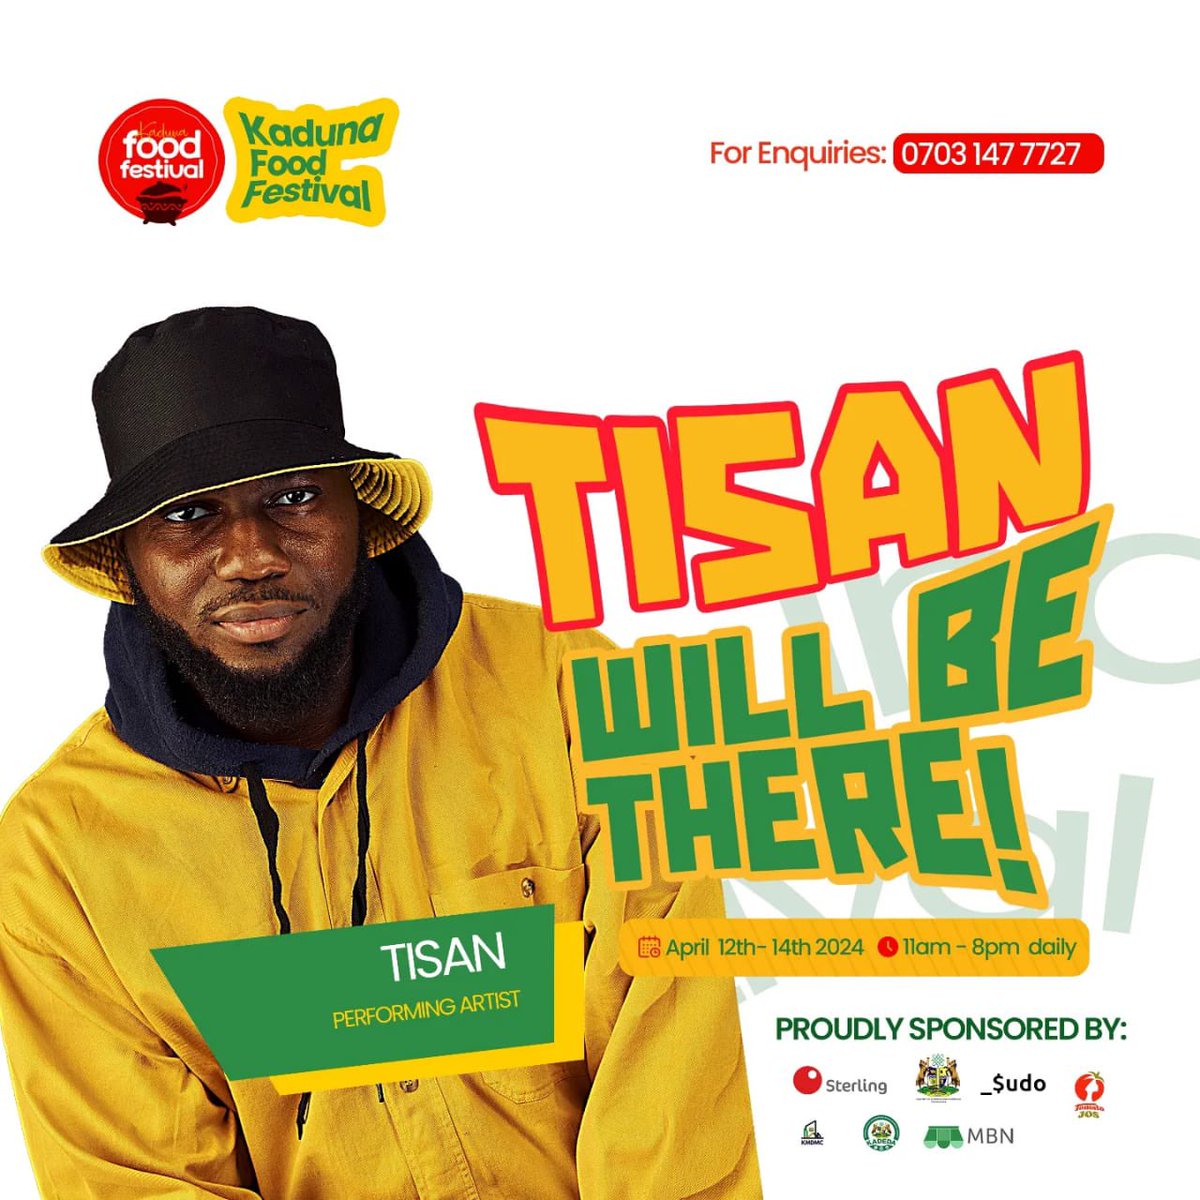 We're just a stone's throw away from the highly anticipated D-Day of the Kaduna Food Festival, and the excitement is palpable! We are thrilled to announce that the incredibly talented Tisan will be joining us as one of our guest artistes. #kadunafoodfestival